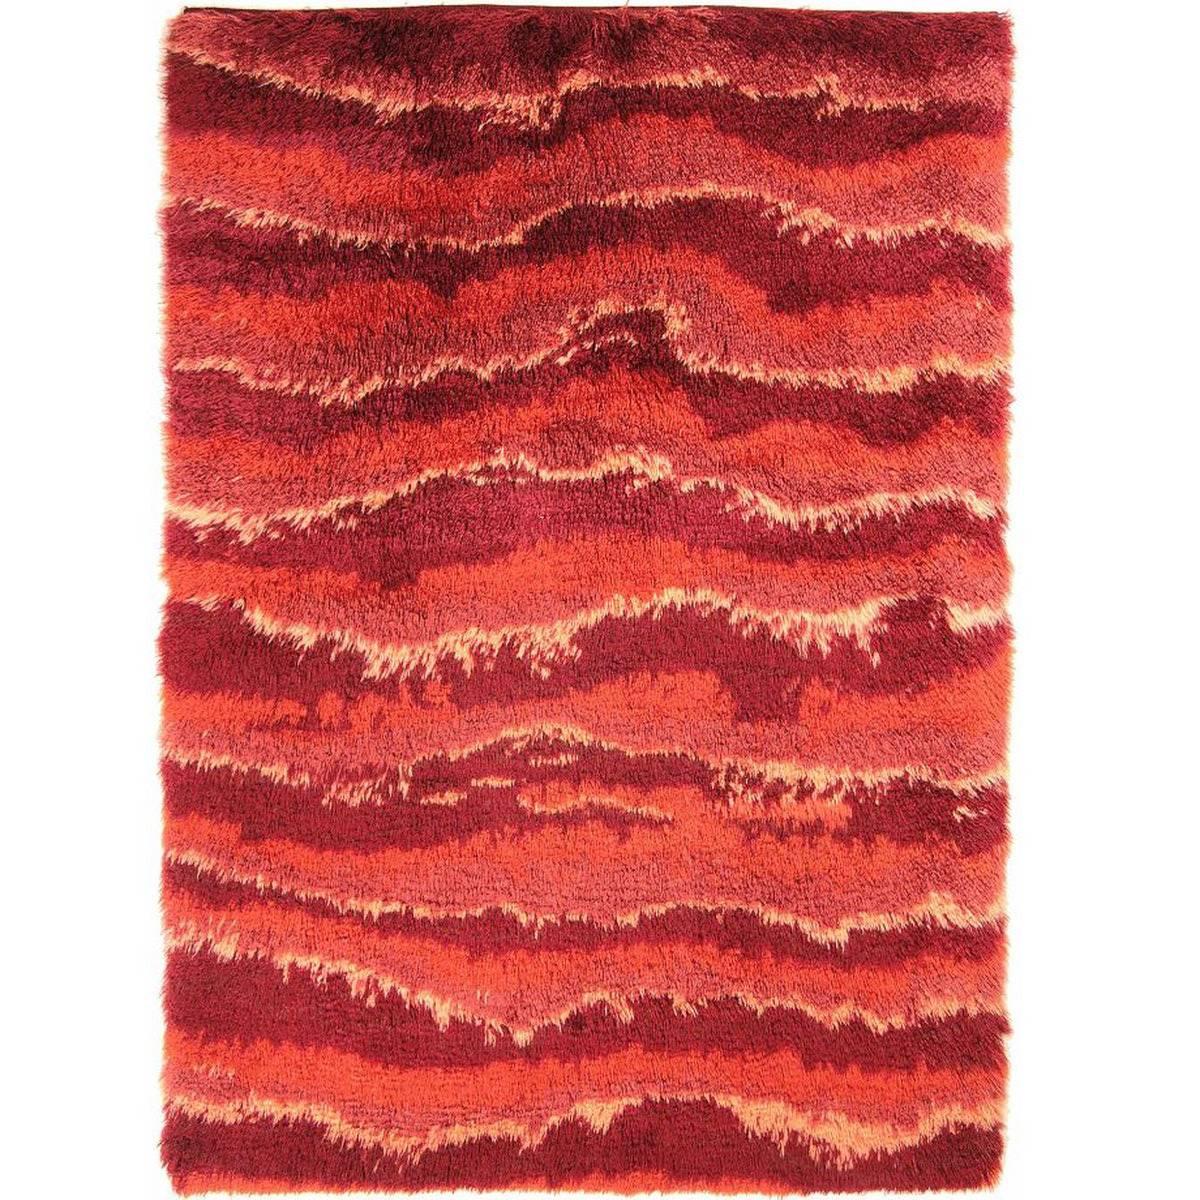 Turkish Red Shag Rug For Sale